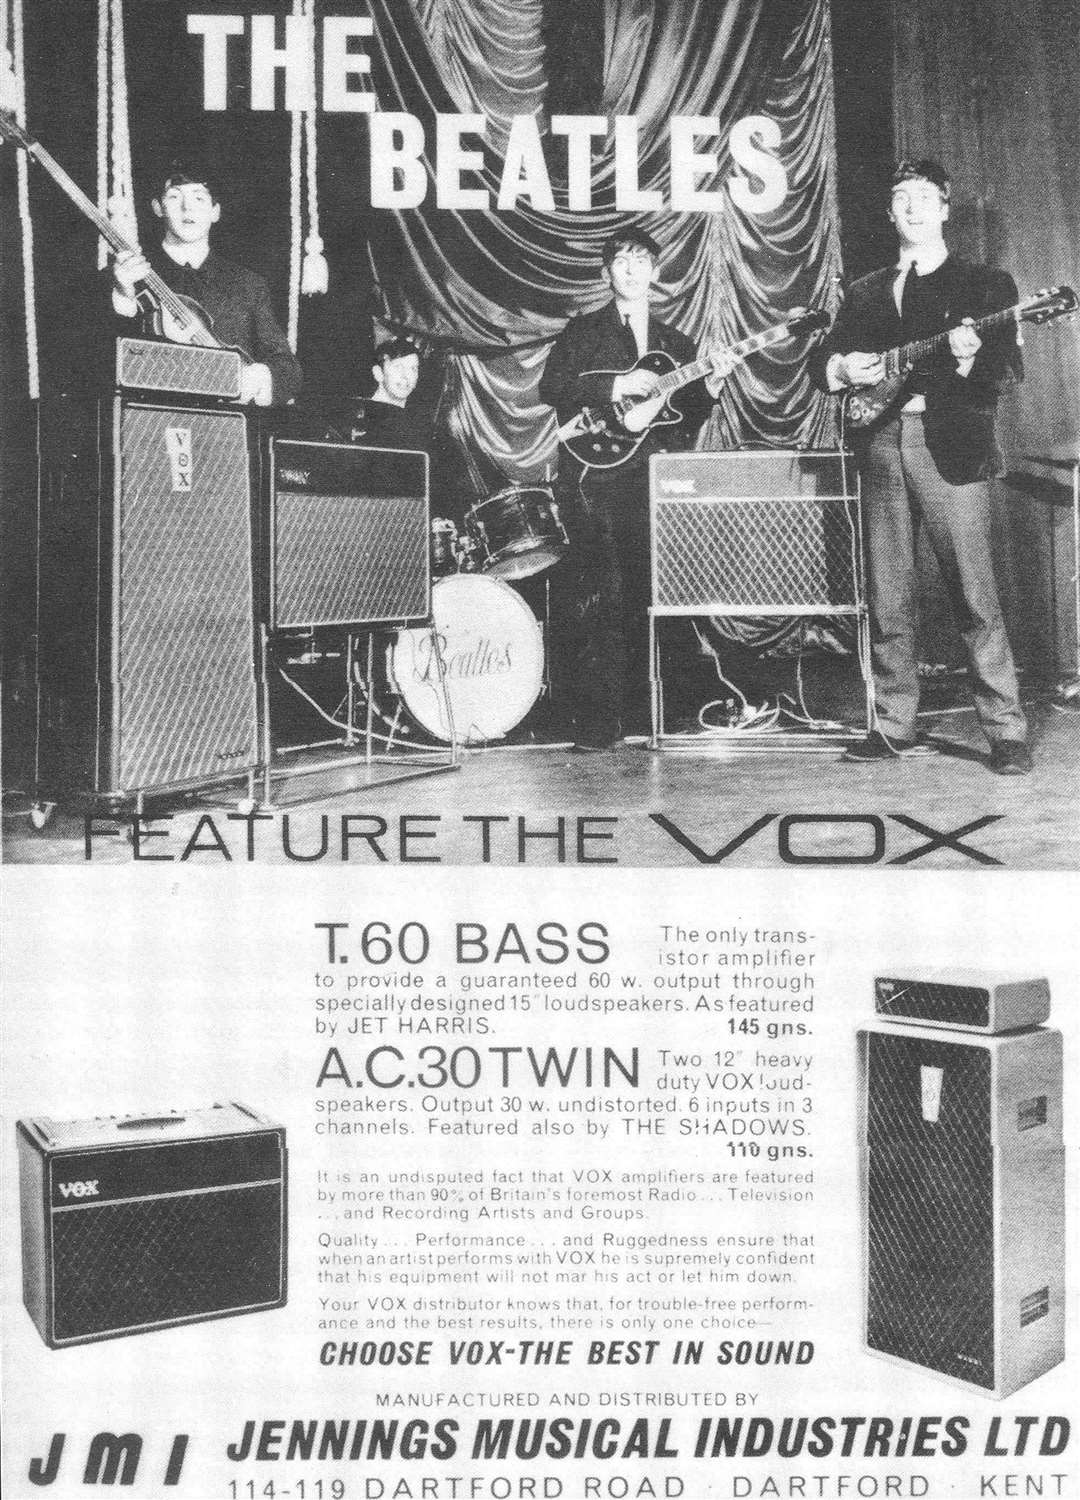 Posters used to advertise the Vox amplifiers made in Dartford. Photo: Paul Bundock